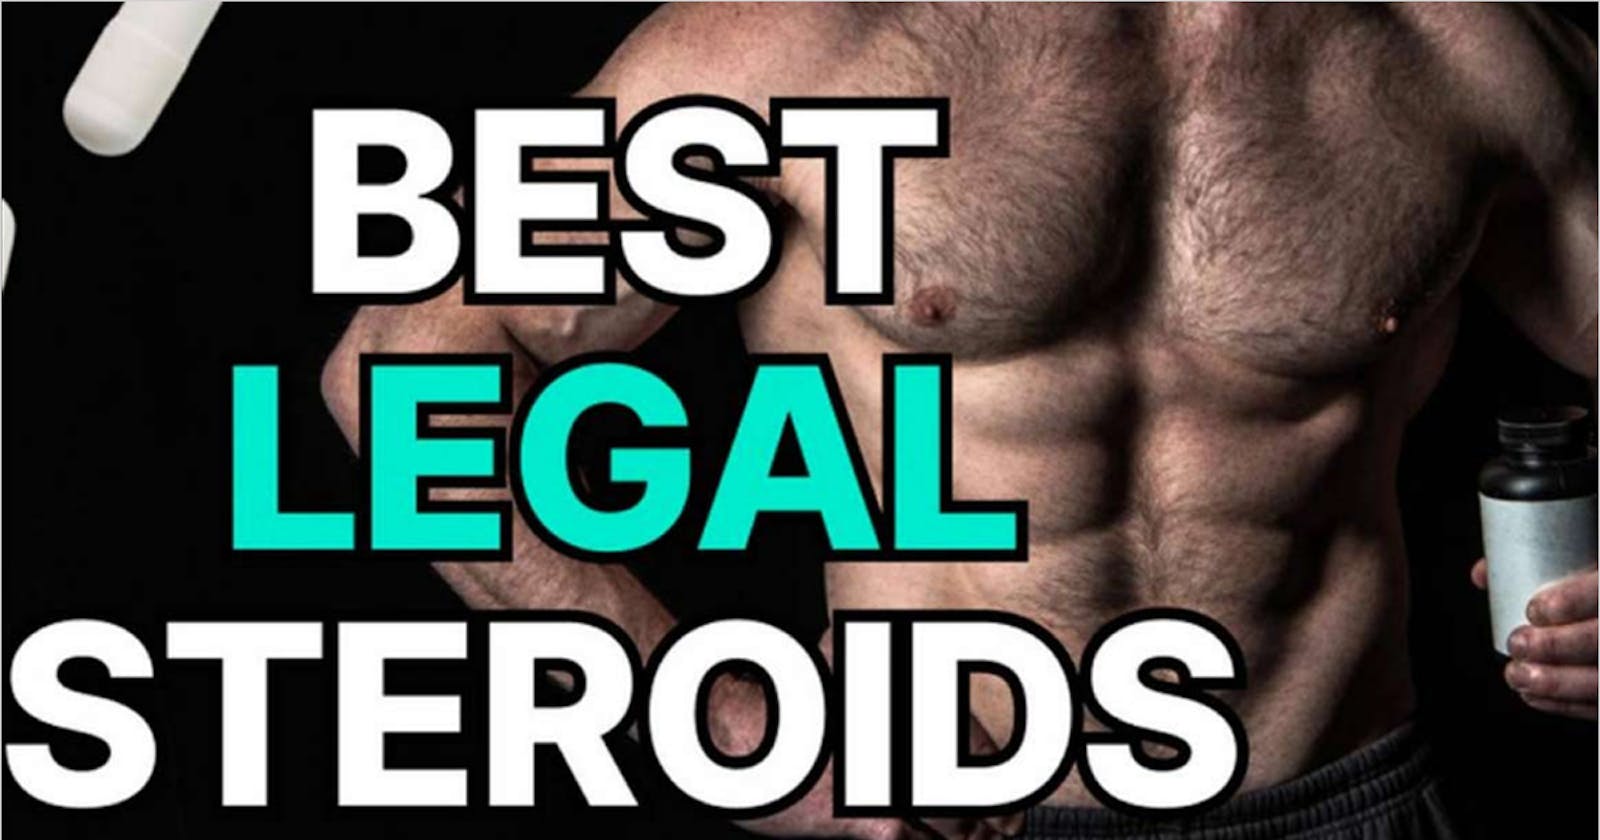 Best Legal Steroids - Best Legal & Natural Alternatives to Steroids for Bodybuilding & Muscle Growth?